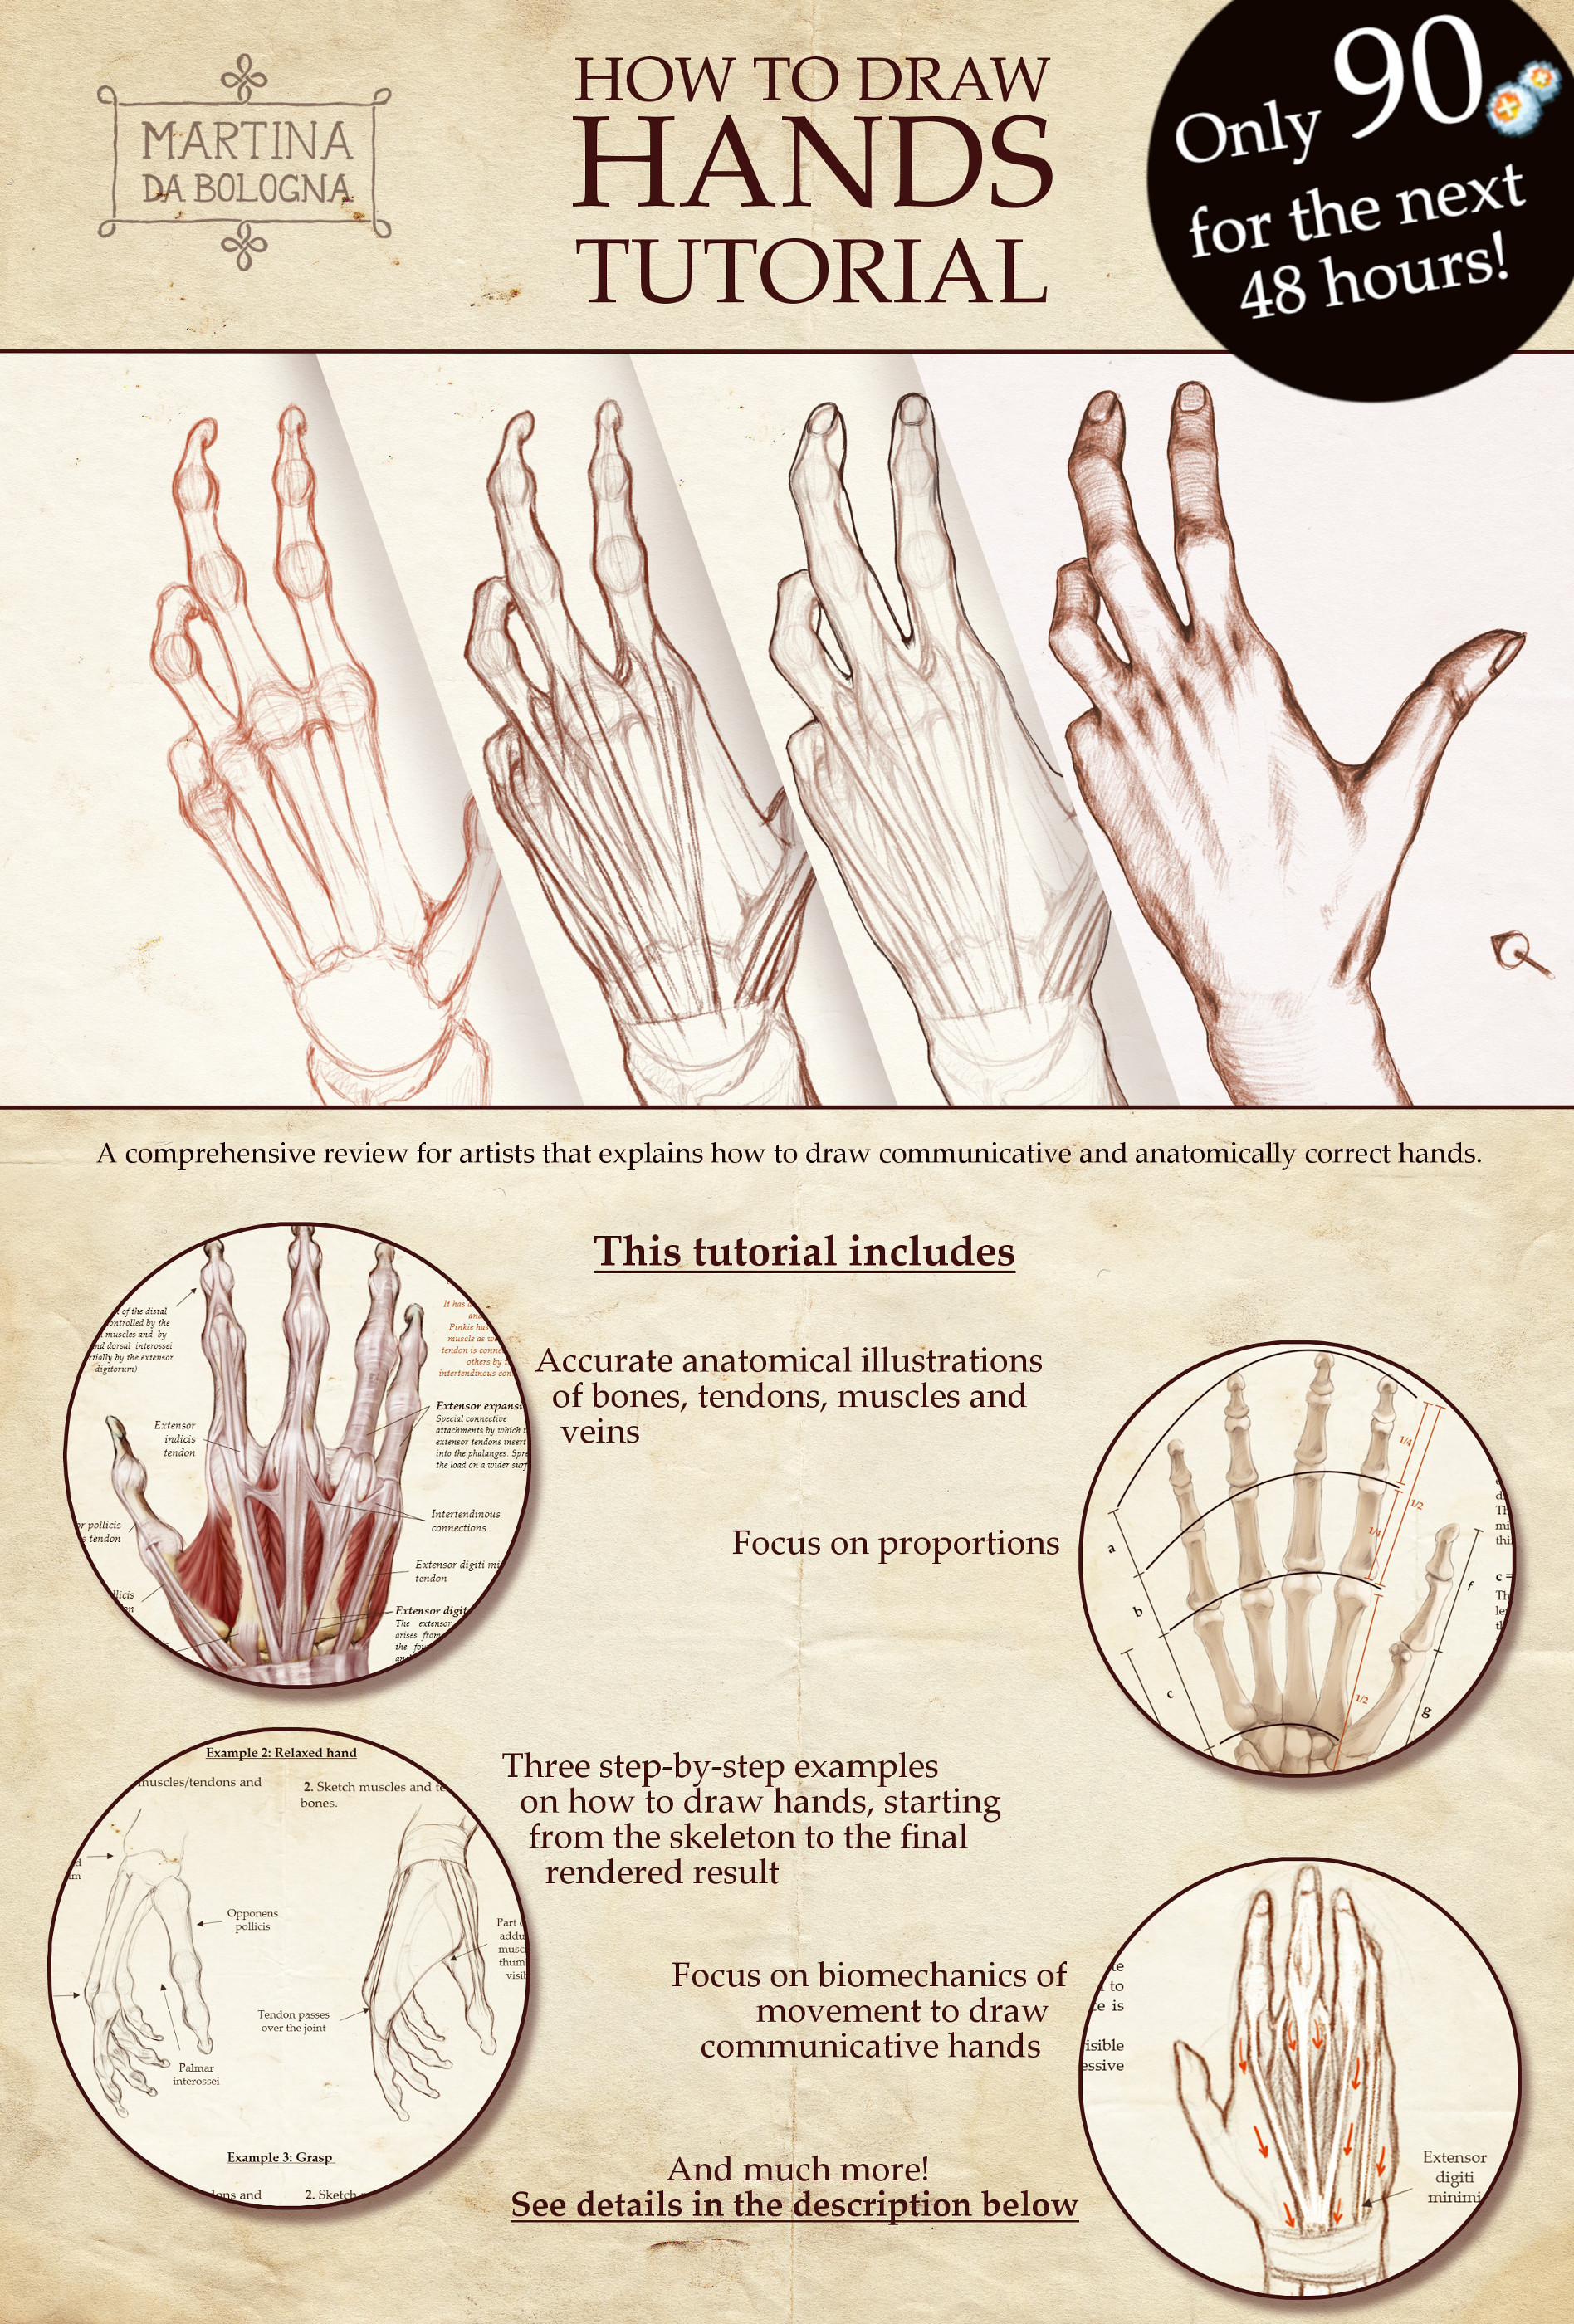 How to Draw Hands Tutorial by MartinaDaBologna on DeviantArt